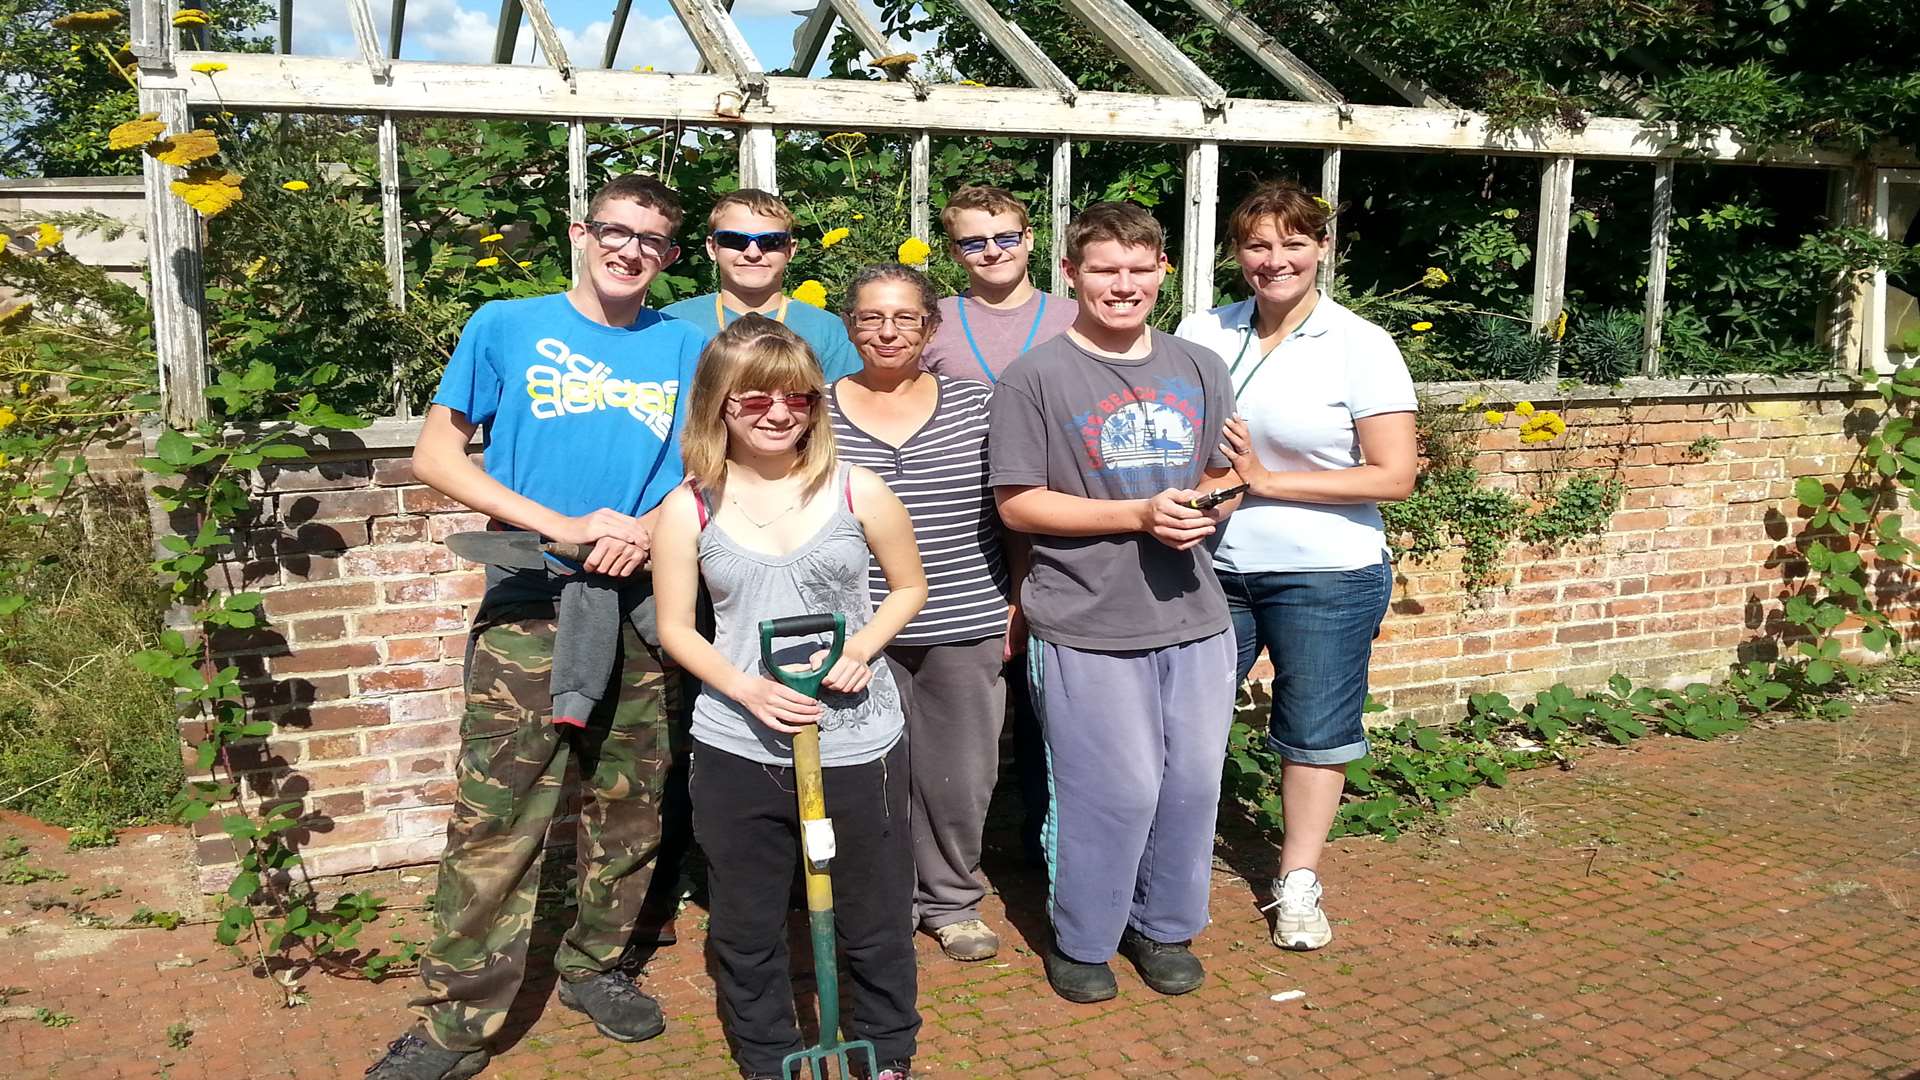 Brogdale CIC members at a Georgian garden they are renovating.